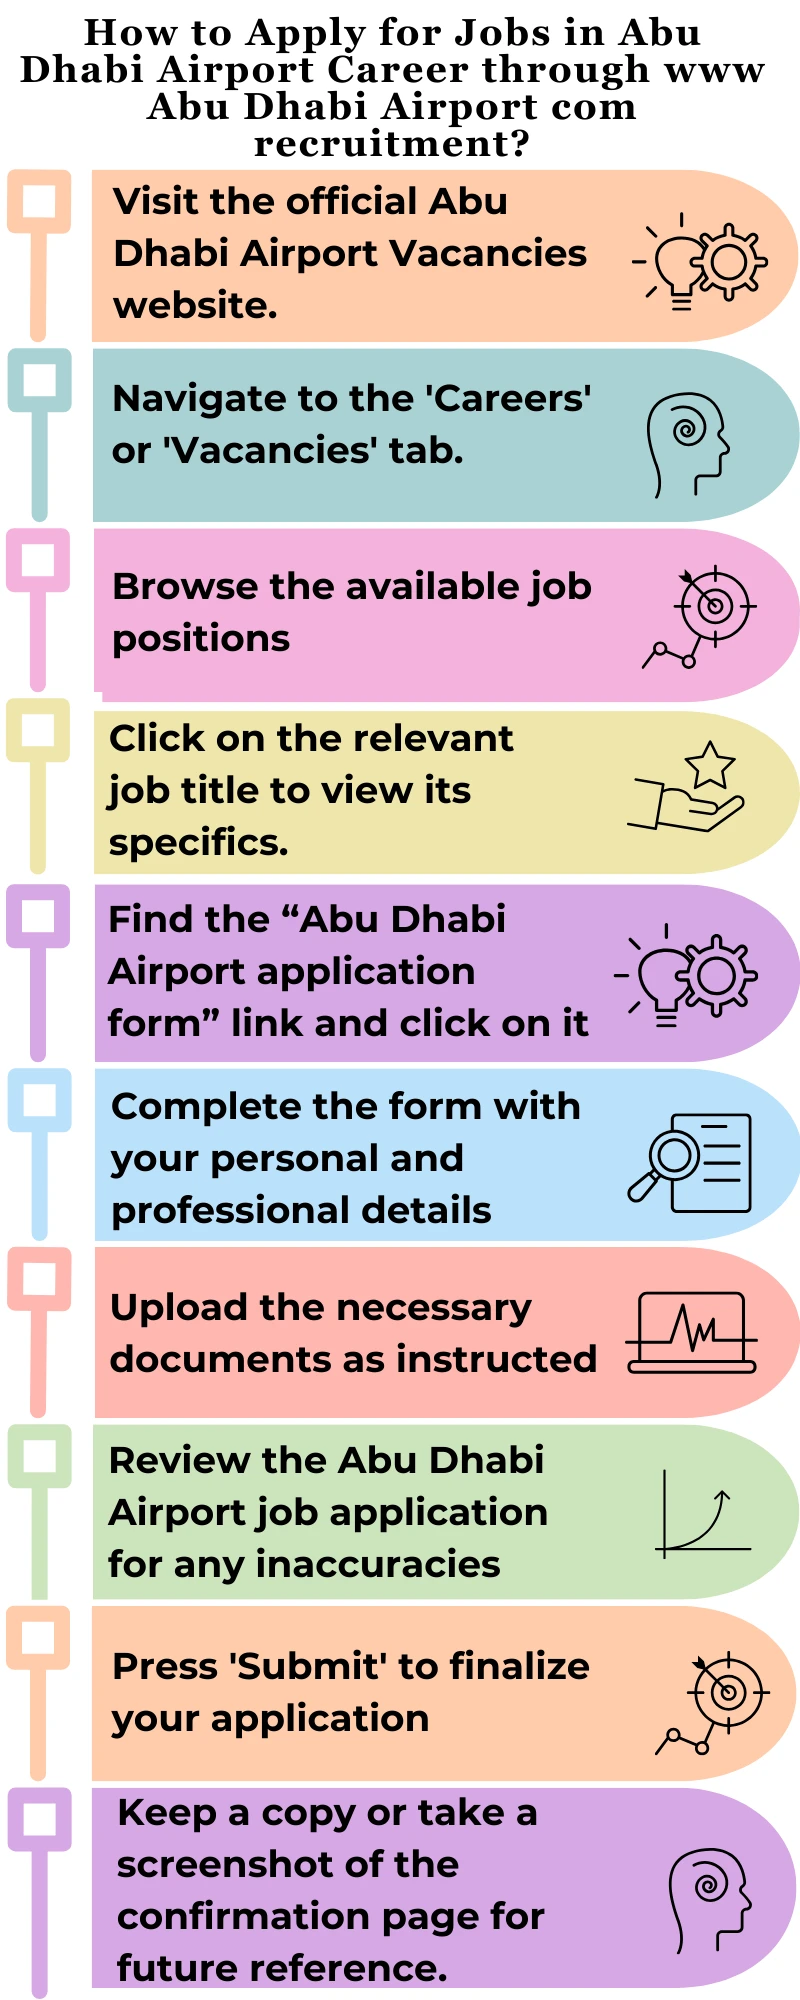 How to Apply for Jobs in Abu Dhabi Airport Career through www Abu Dhabi Airport com recruitment?